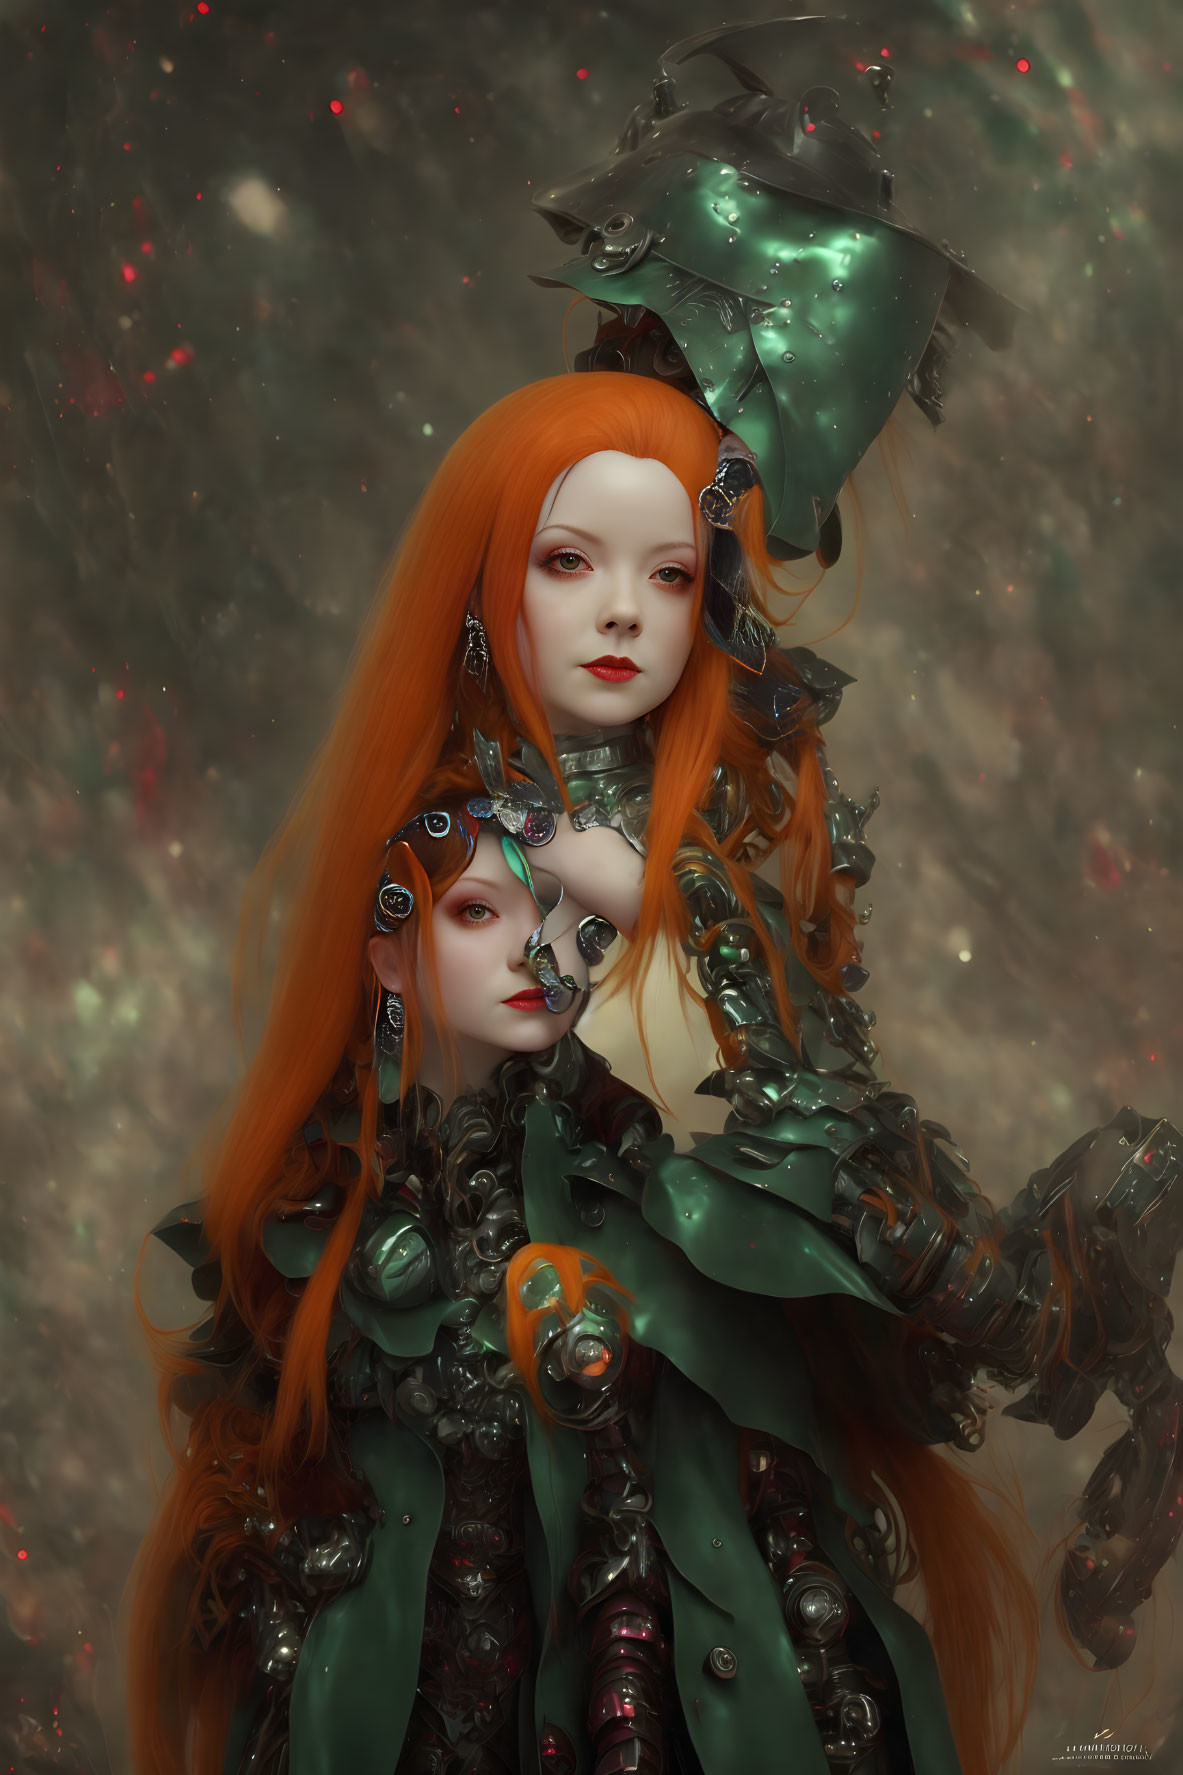 Red-Haired Figures in Green Armor in Mystical Setting